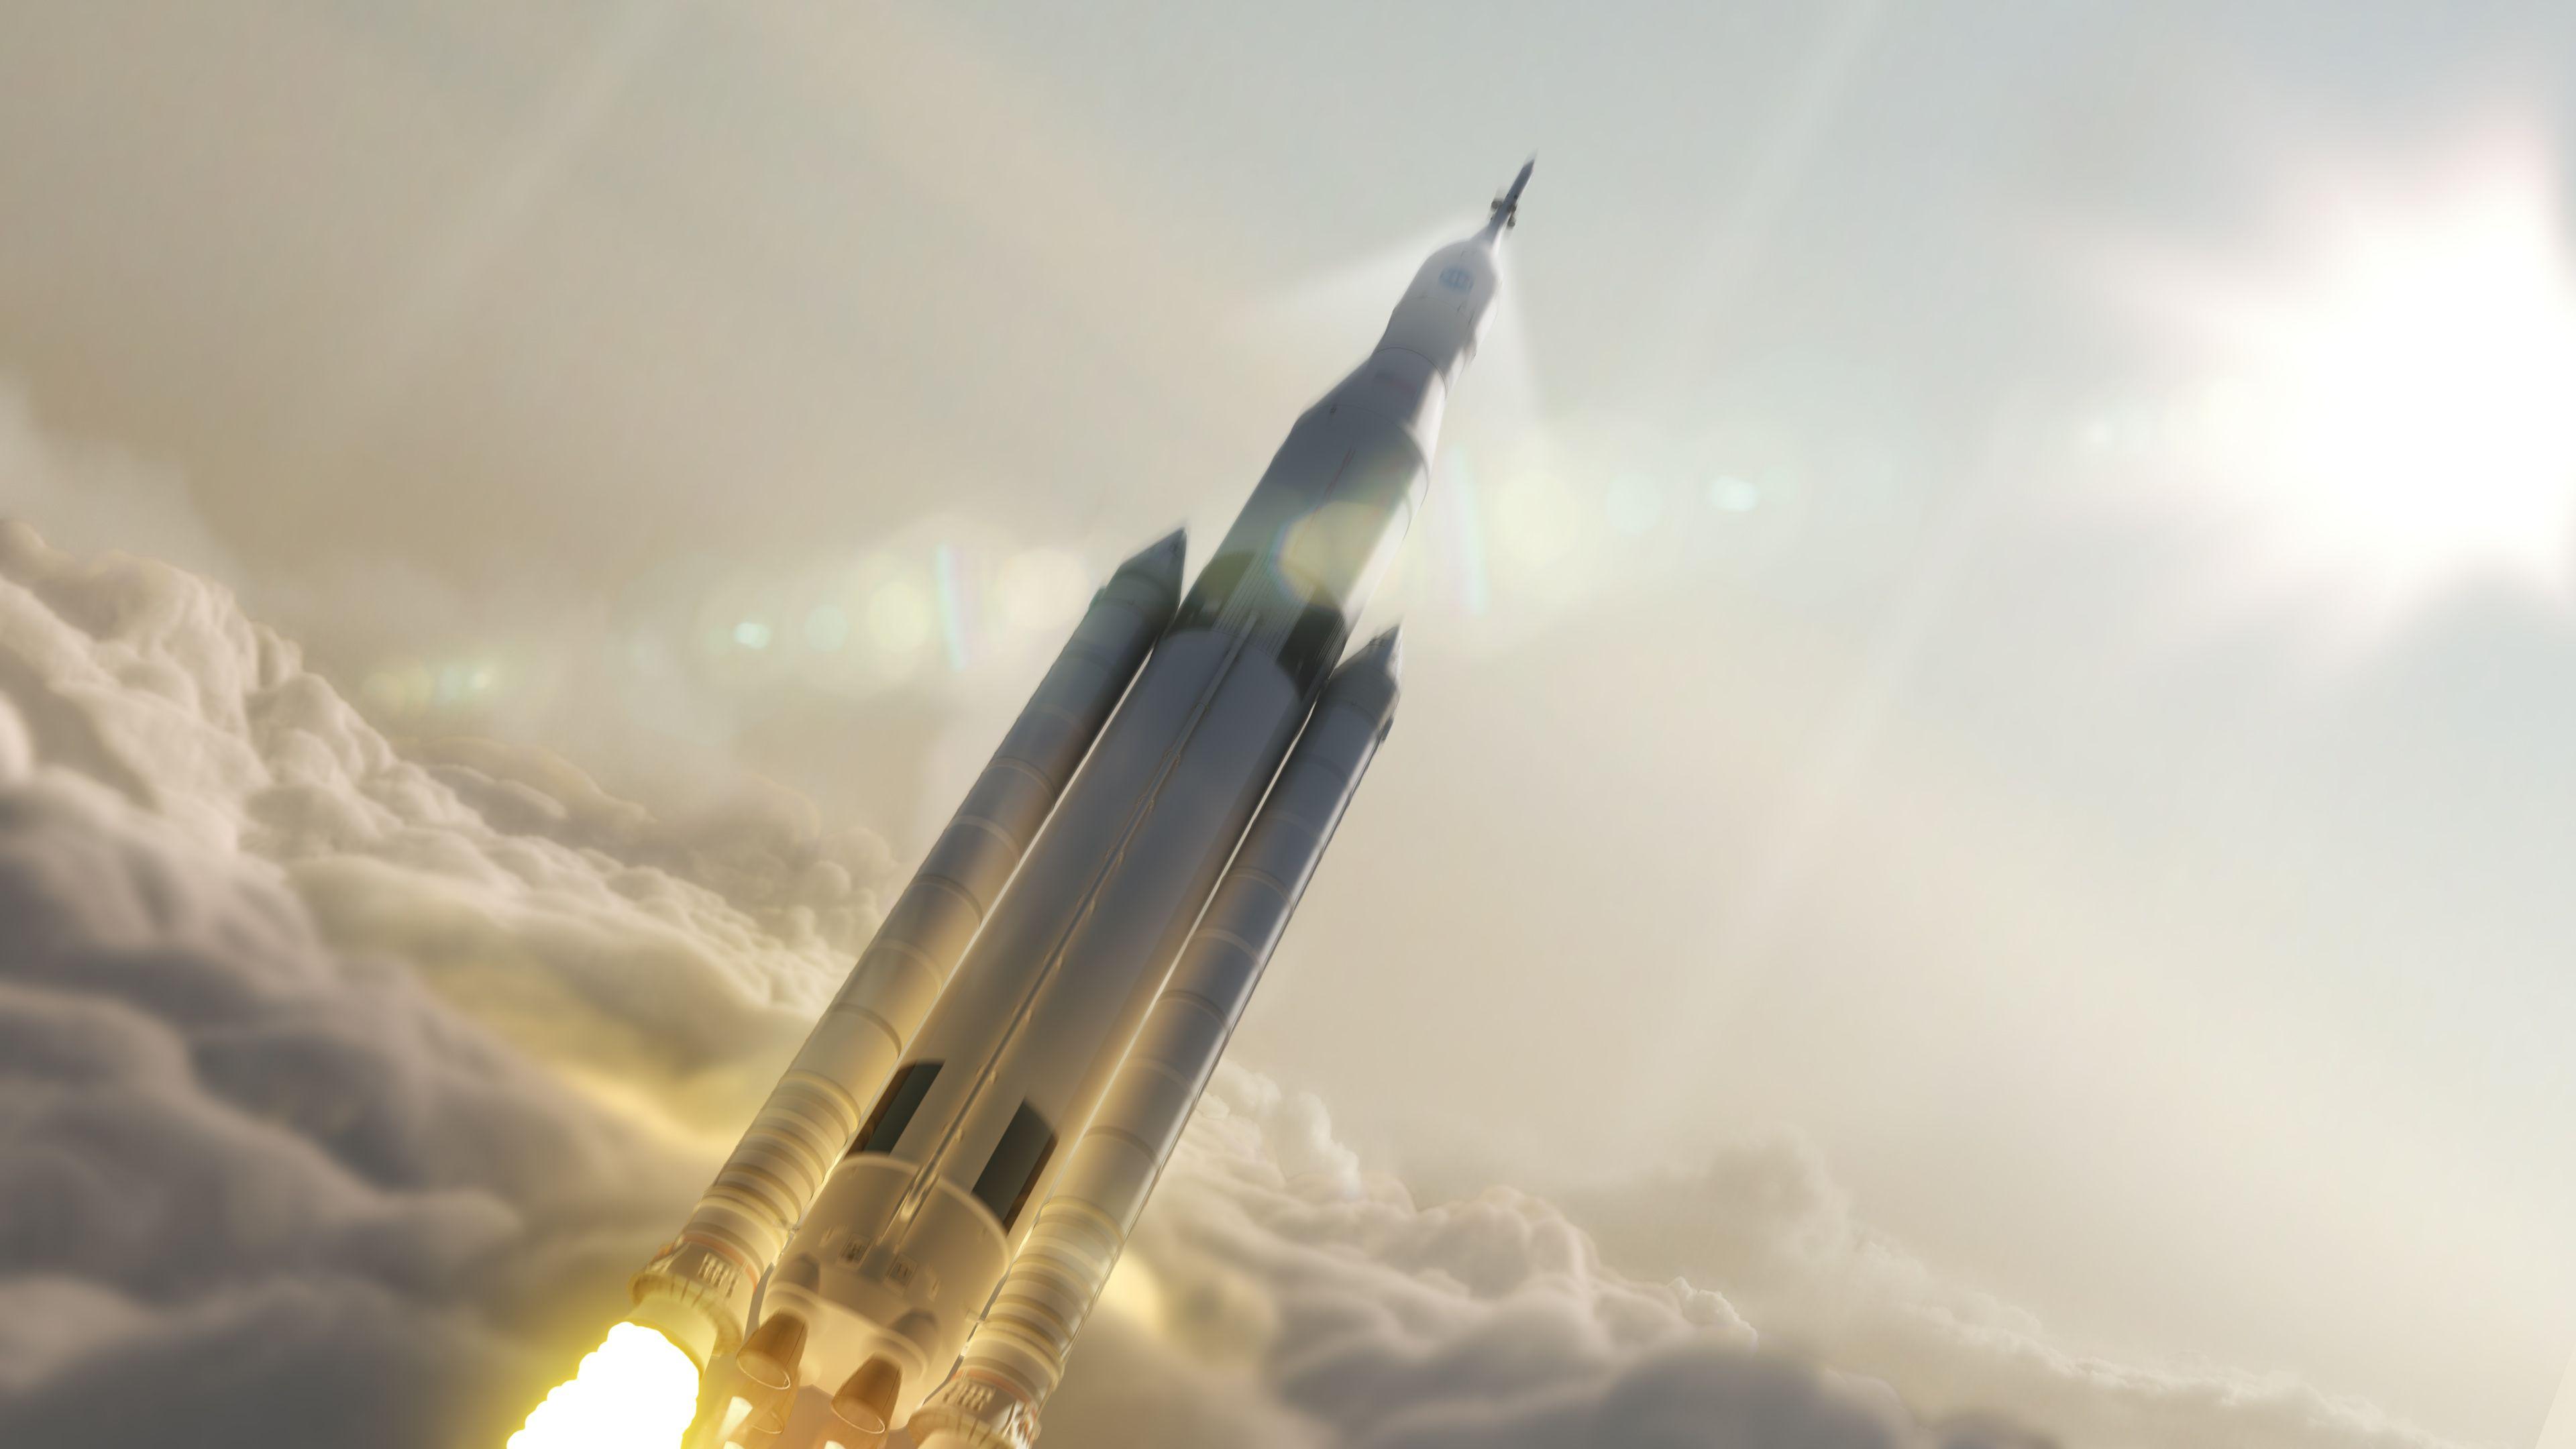 NASA Completes Key Review of World's Most Powerful Rocket